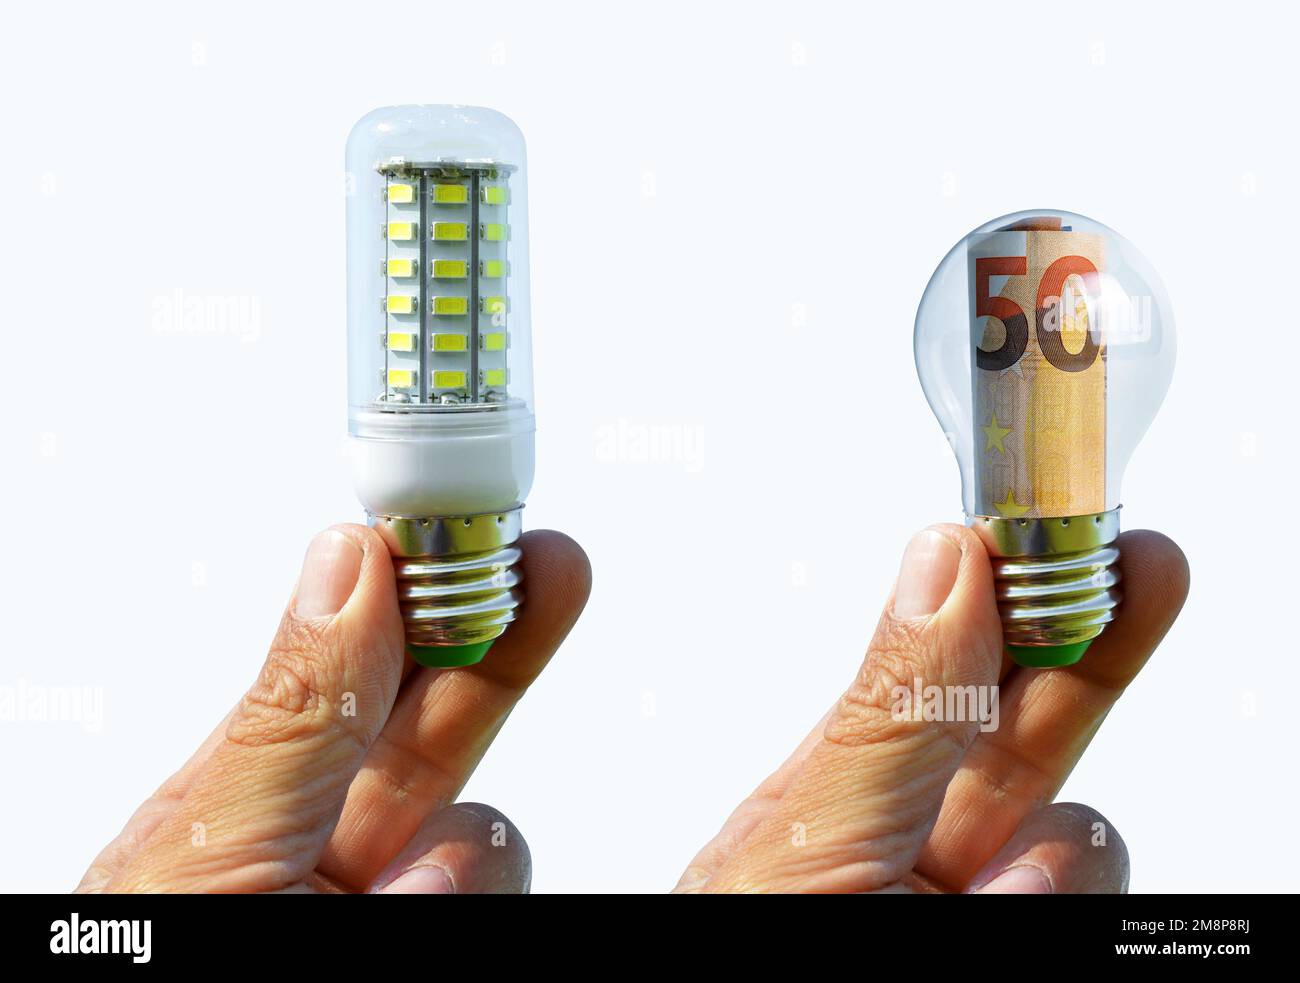 Hands holding light bulb isolated on white background. Concept of saving money for energy. Stock Photo